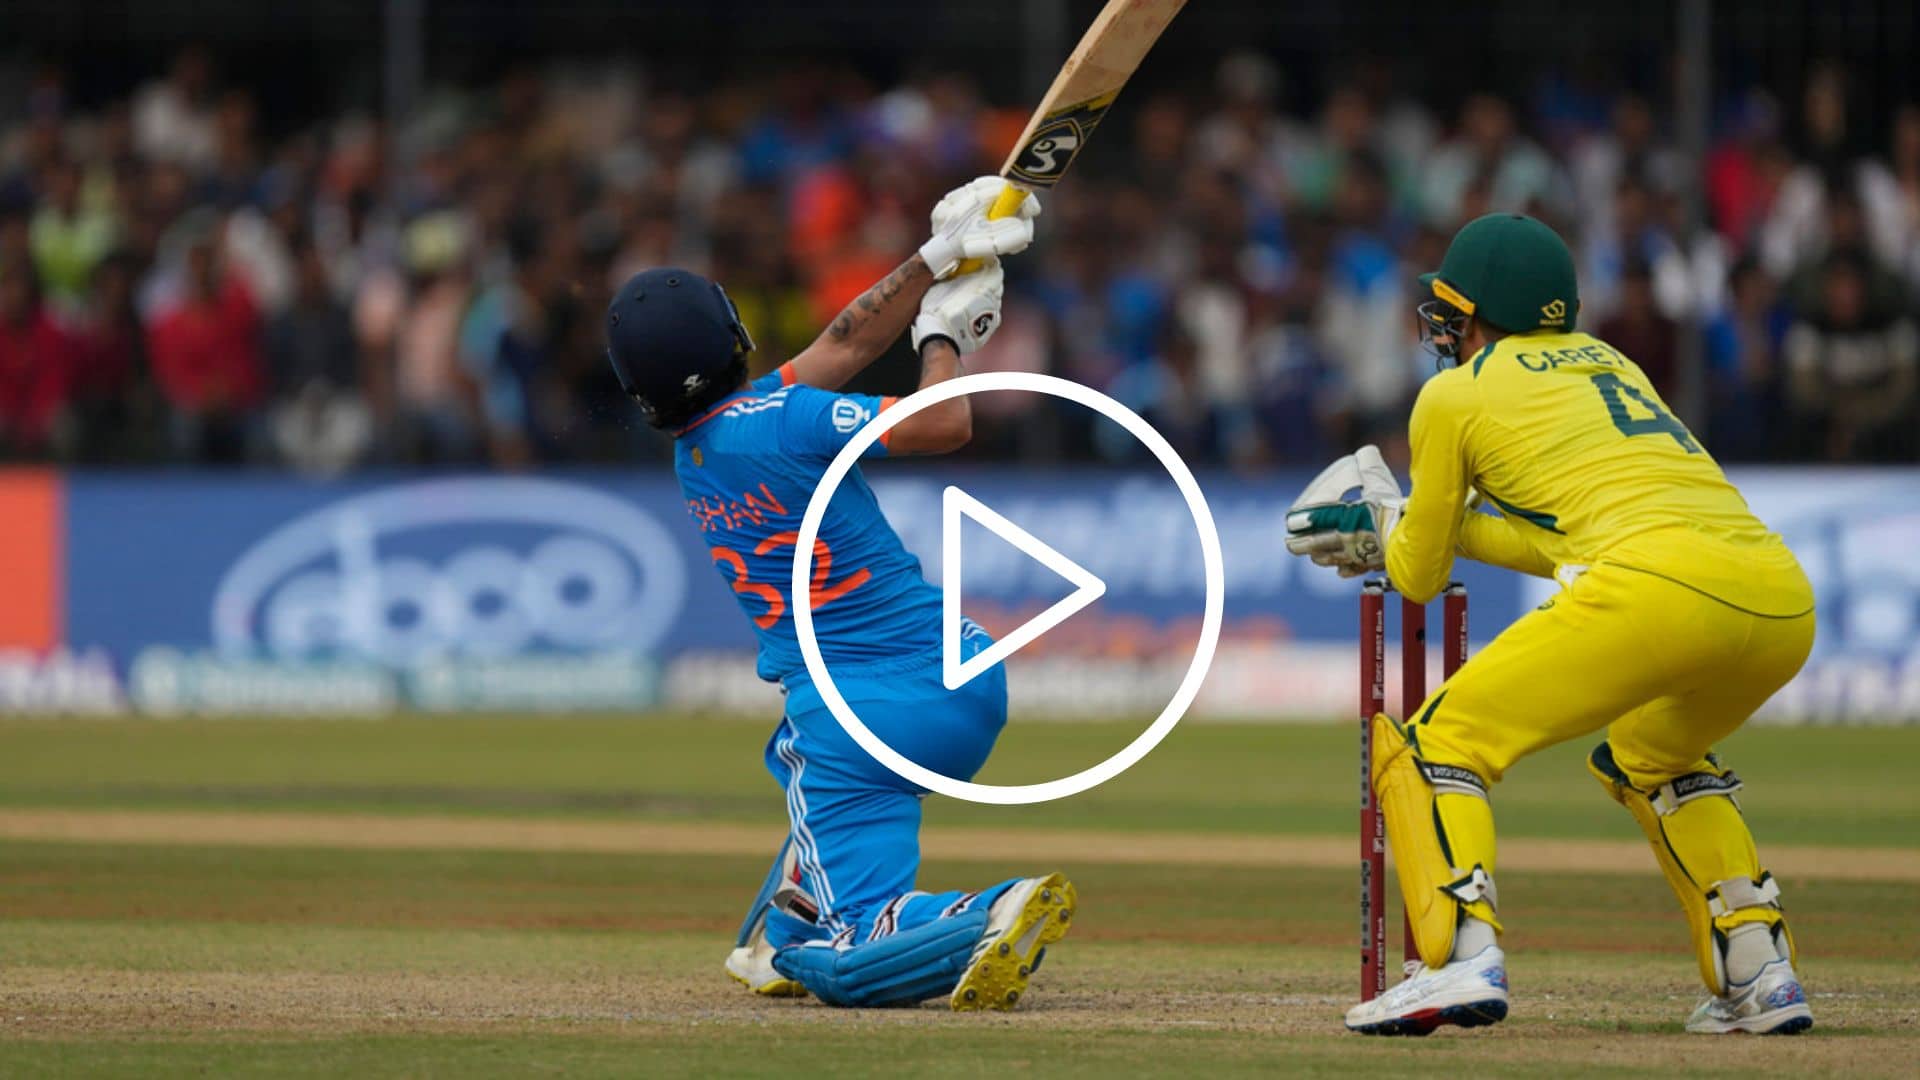 [Watch] Ishan Kishan Slams Belligerent Six And Departs On Next Delivery vs Zampa